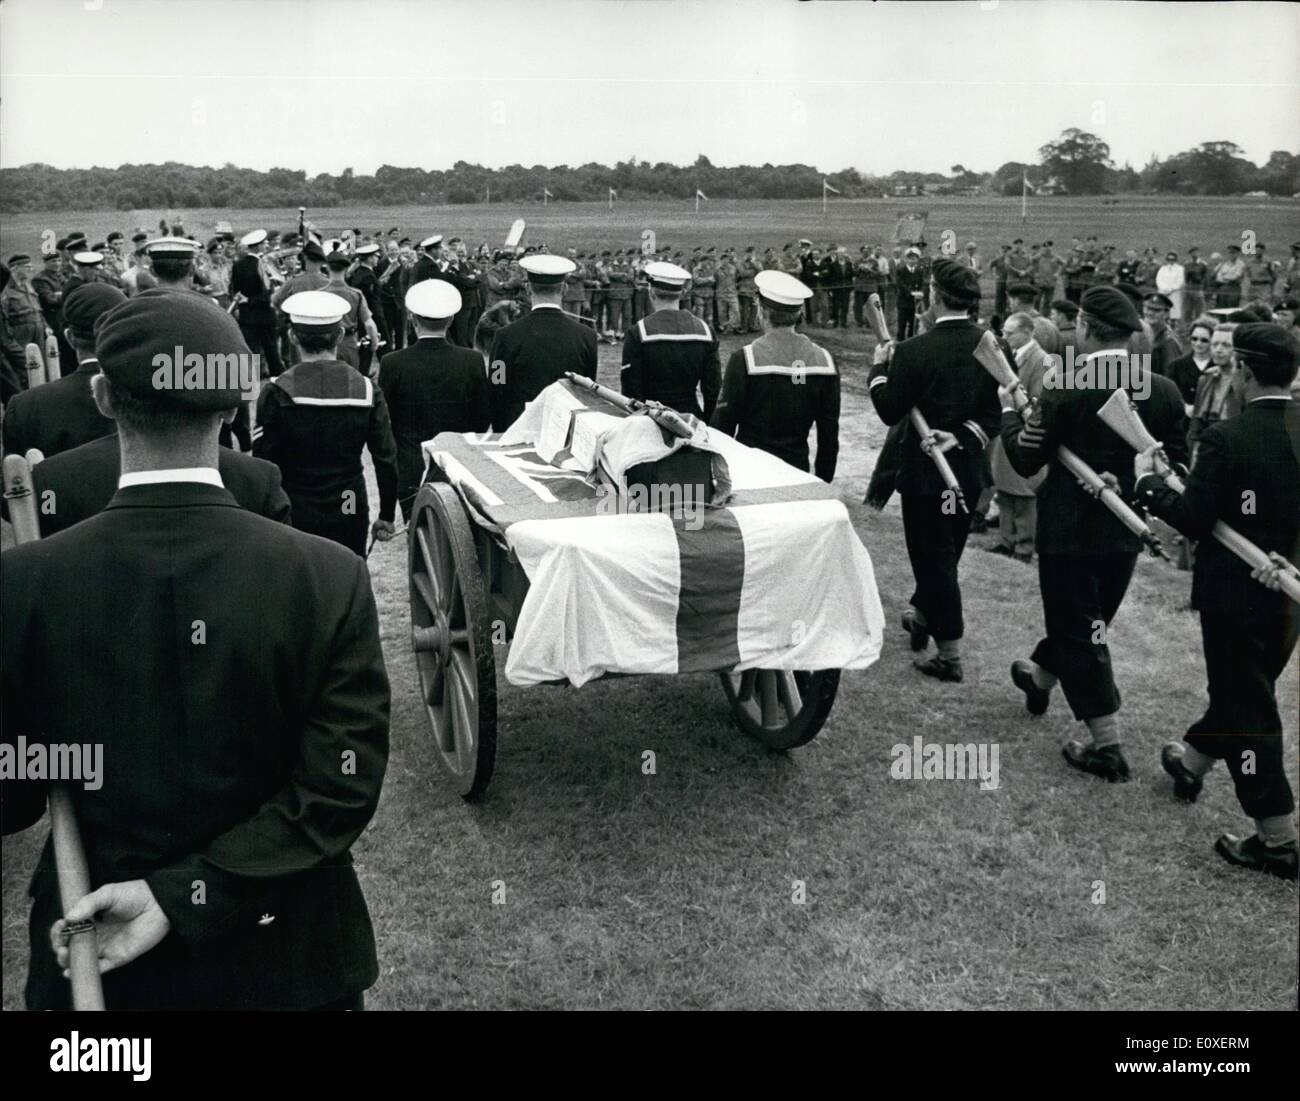 Jul. 07, 1966 - Burial party for the British rifle: The Services, when they think of a joke, exploit it with enthusiasm, and that was what they did yesterday. The navy, assisted by some Army and Air Force people, arranged a mock funeral for the Lee Enfield No. 4 rifle, standard infantry weapon of the last year, which is gradually being replaced by NATO's new F.L. rifle. At the Bisley range in Surrey, where a United Services shooting match was being held, 26 Naval officers and men in No. 1 uniform escorted a gun-carriage with a No. 4 rifle arranged on top of a coffin draped with the Union Jack Stock Photo